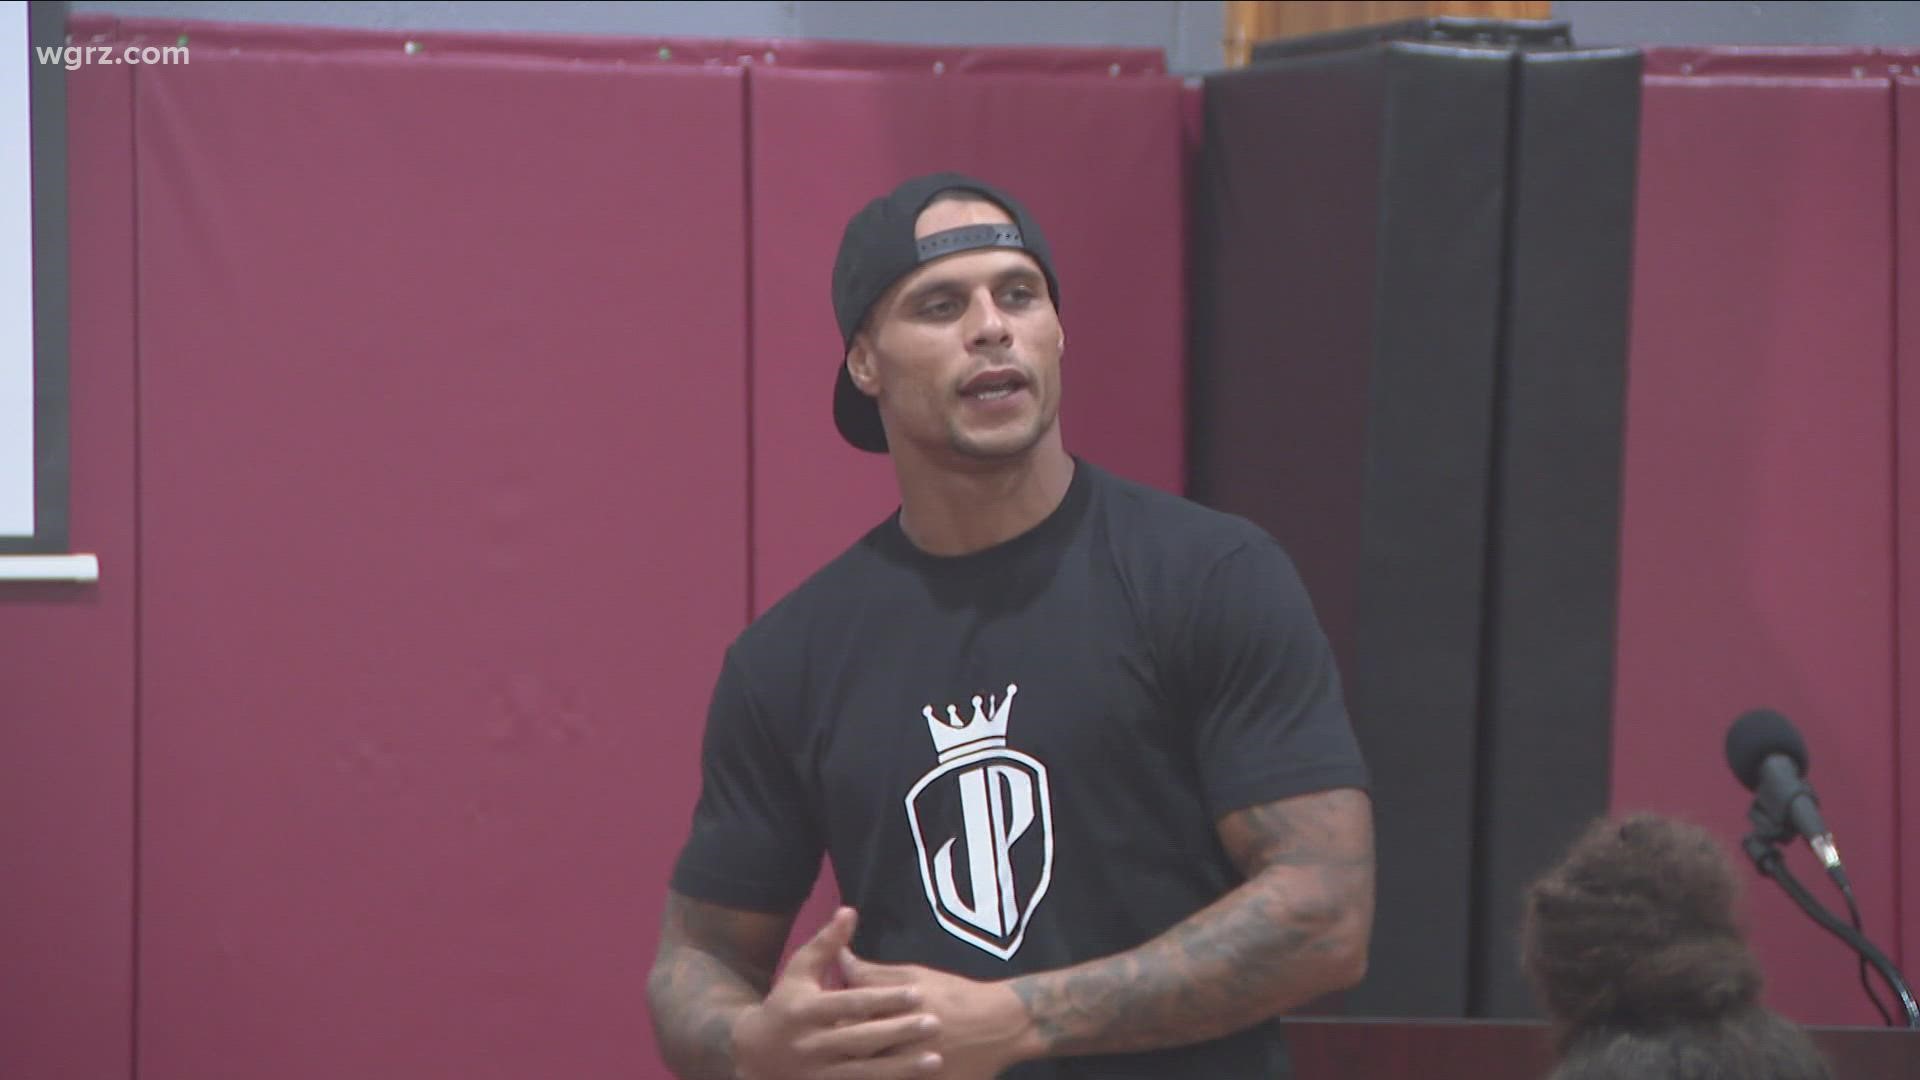 Ever since opening up about his recovery from alcohol addicition, Poyer has dedicated his time away from the field to helping others who share the same struggle.